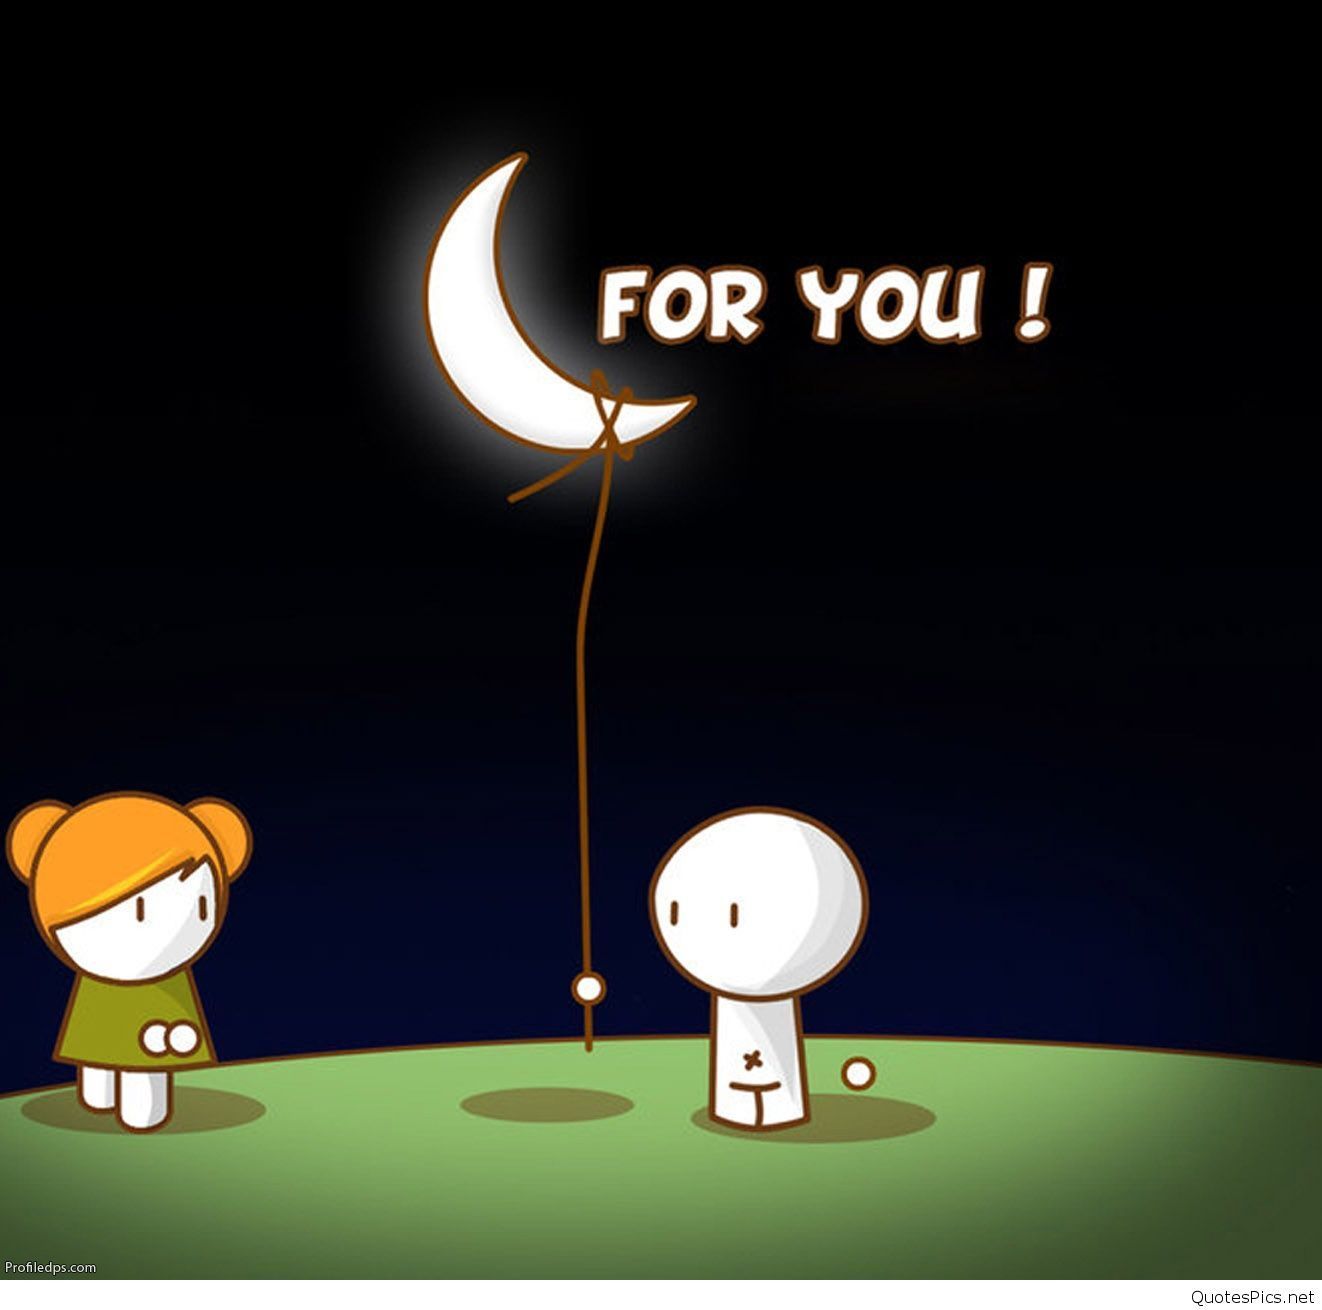 Wallpaper For Facebook Profile Picture. Love couple image, Lasso the moon, Love moon